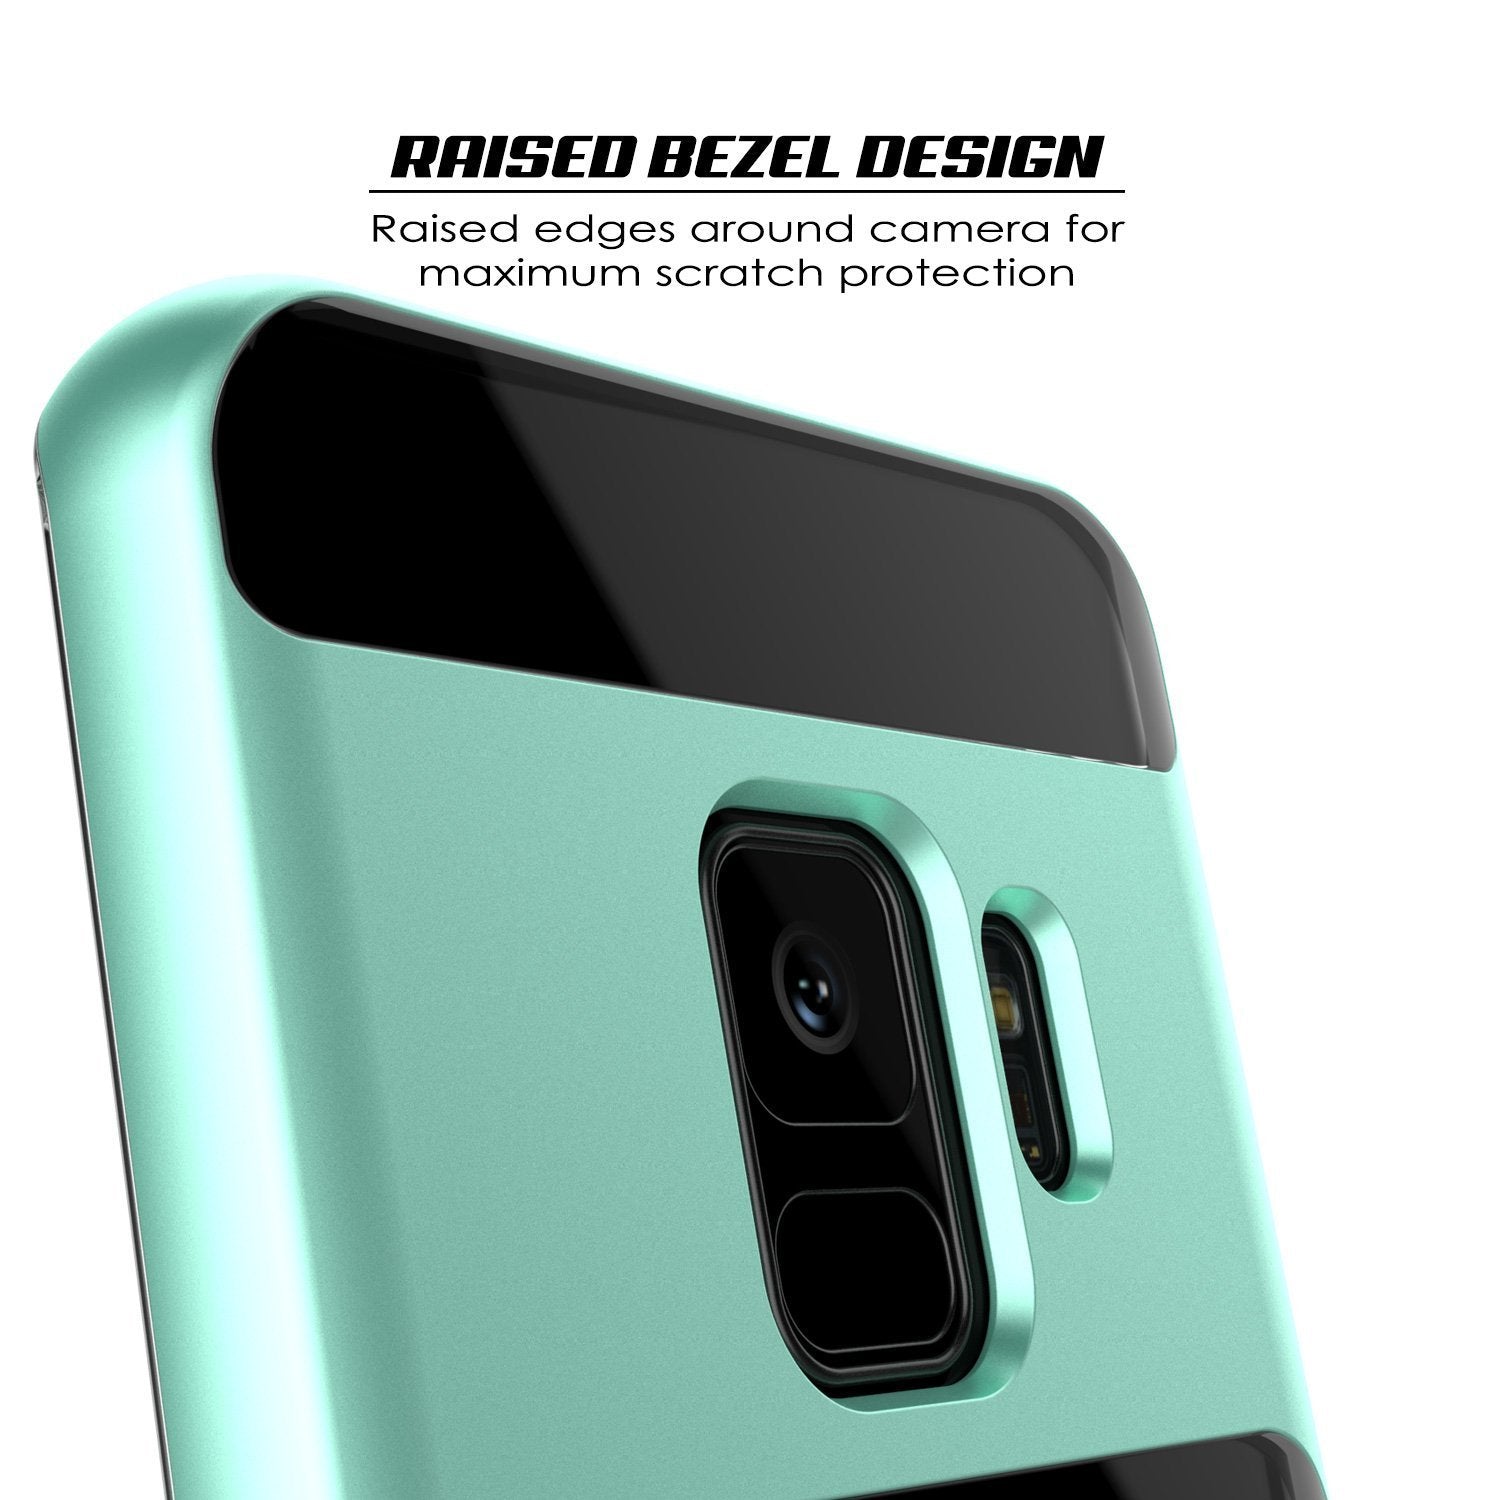 Galaxy S9 Case, PUNKcase [LUCID 3.0 Series] [Slim Fit] [Clear Back] Armor Cover w/ Integrated Kickstand, Anti-Shock System & PUNKSHIELD Screen Protector for Samsung Galaxy S9 [Teal]